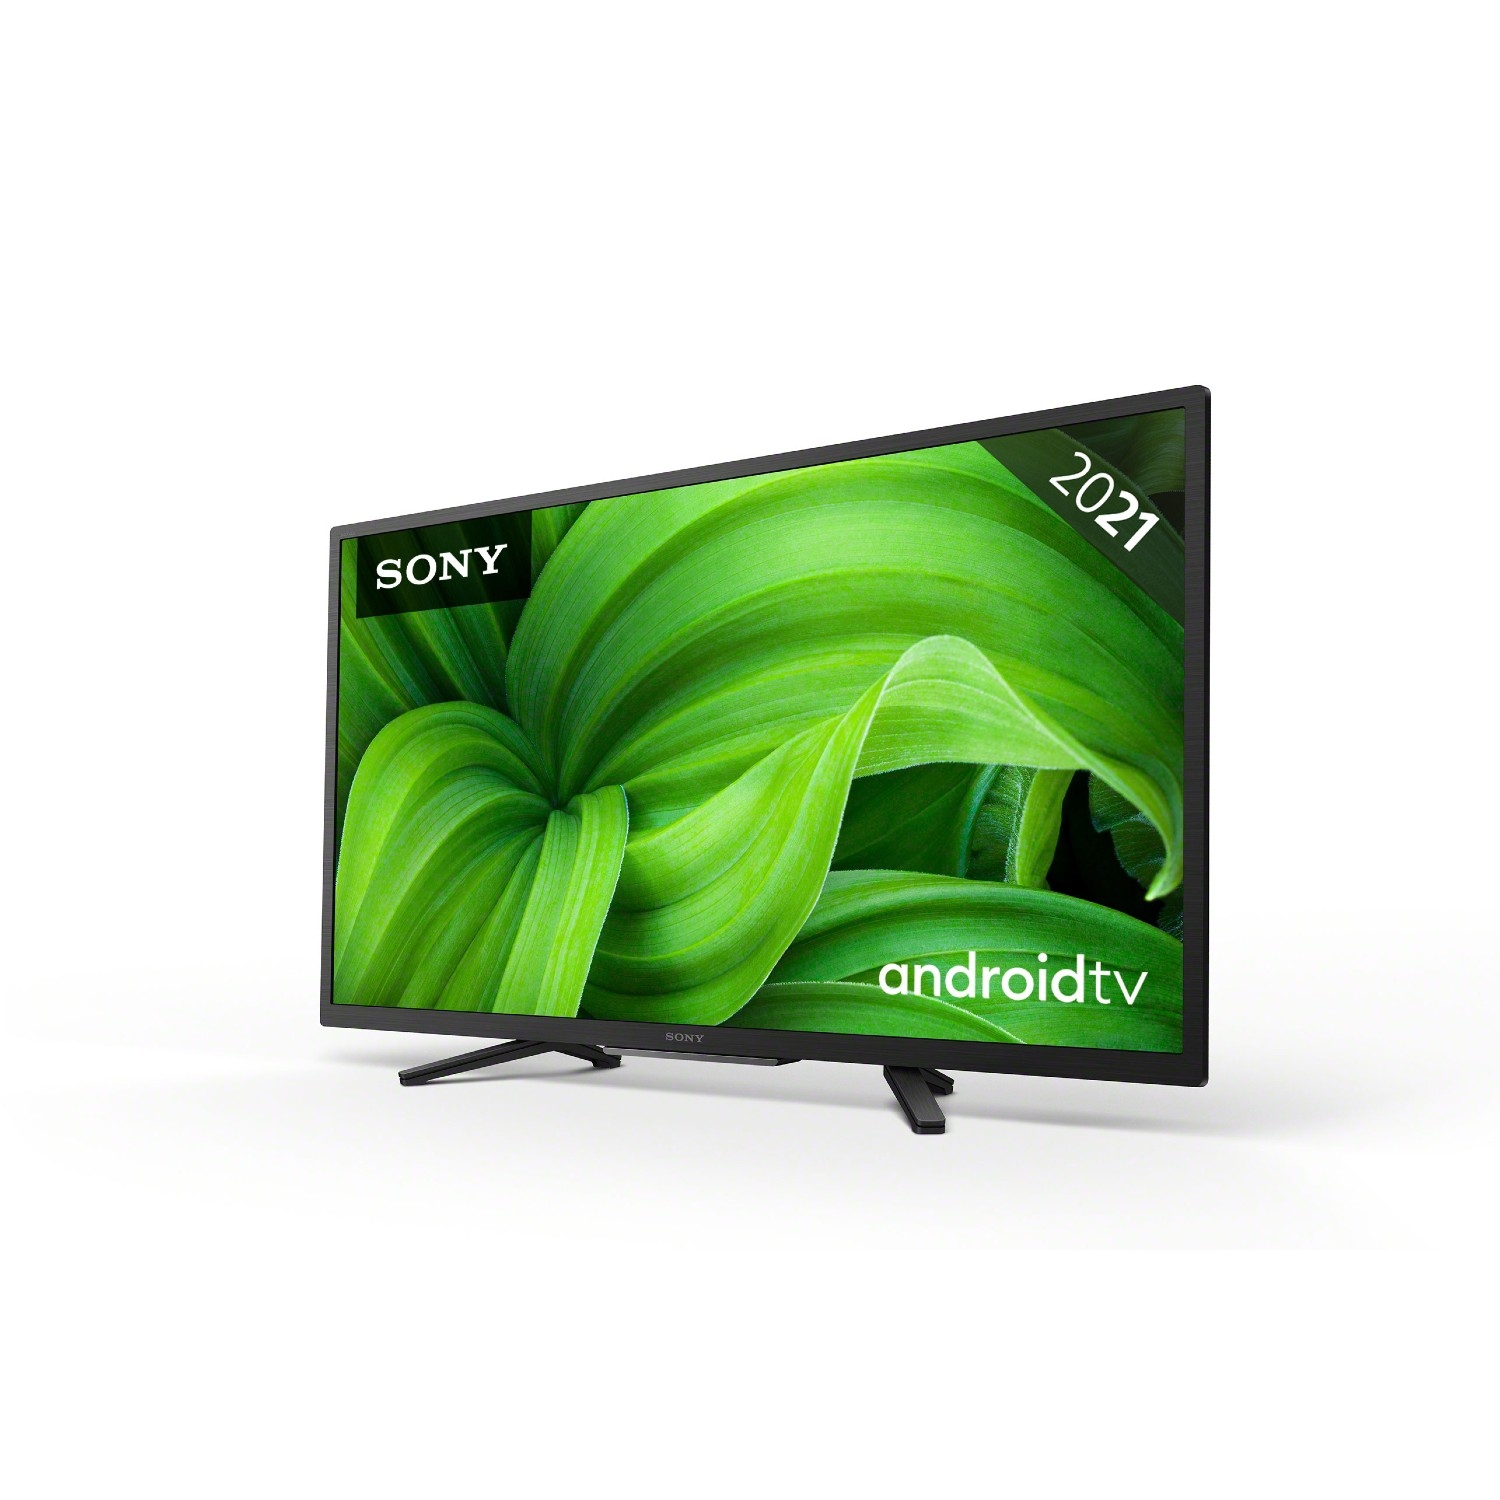 Sony KD32W800PU 32" HD Ready HDR Android TV with Voice Search - 7